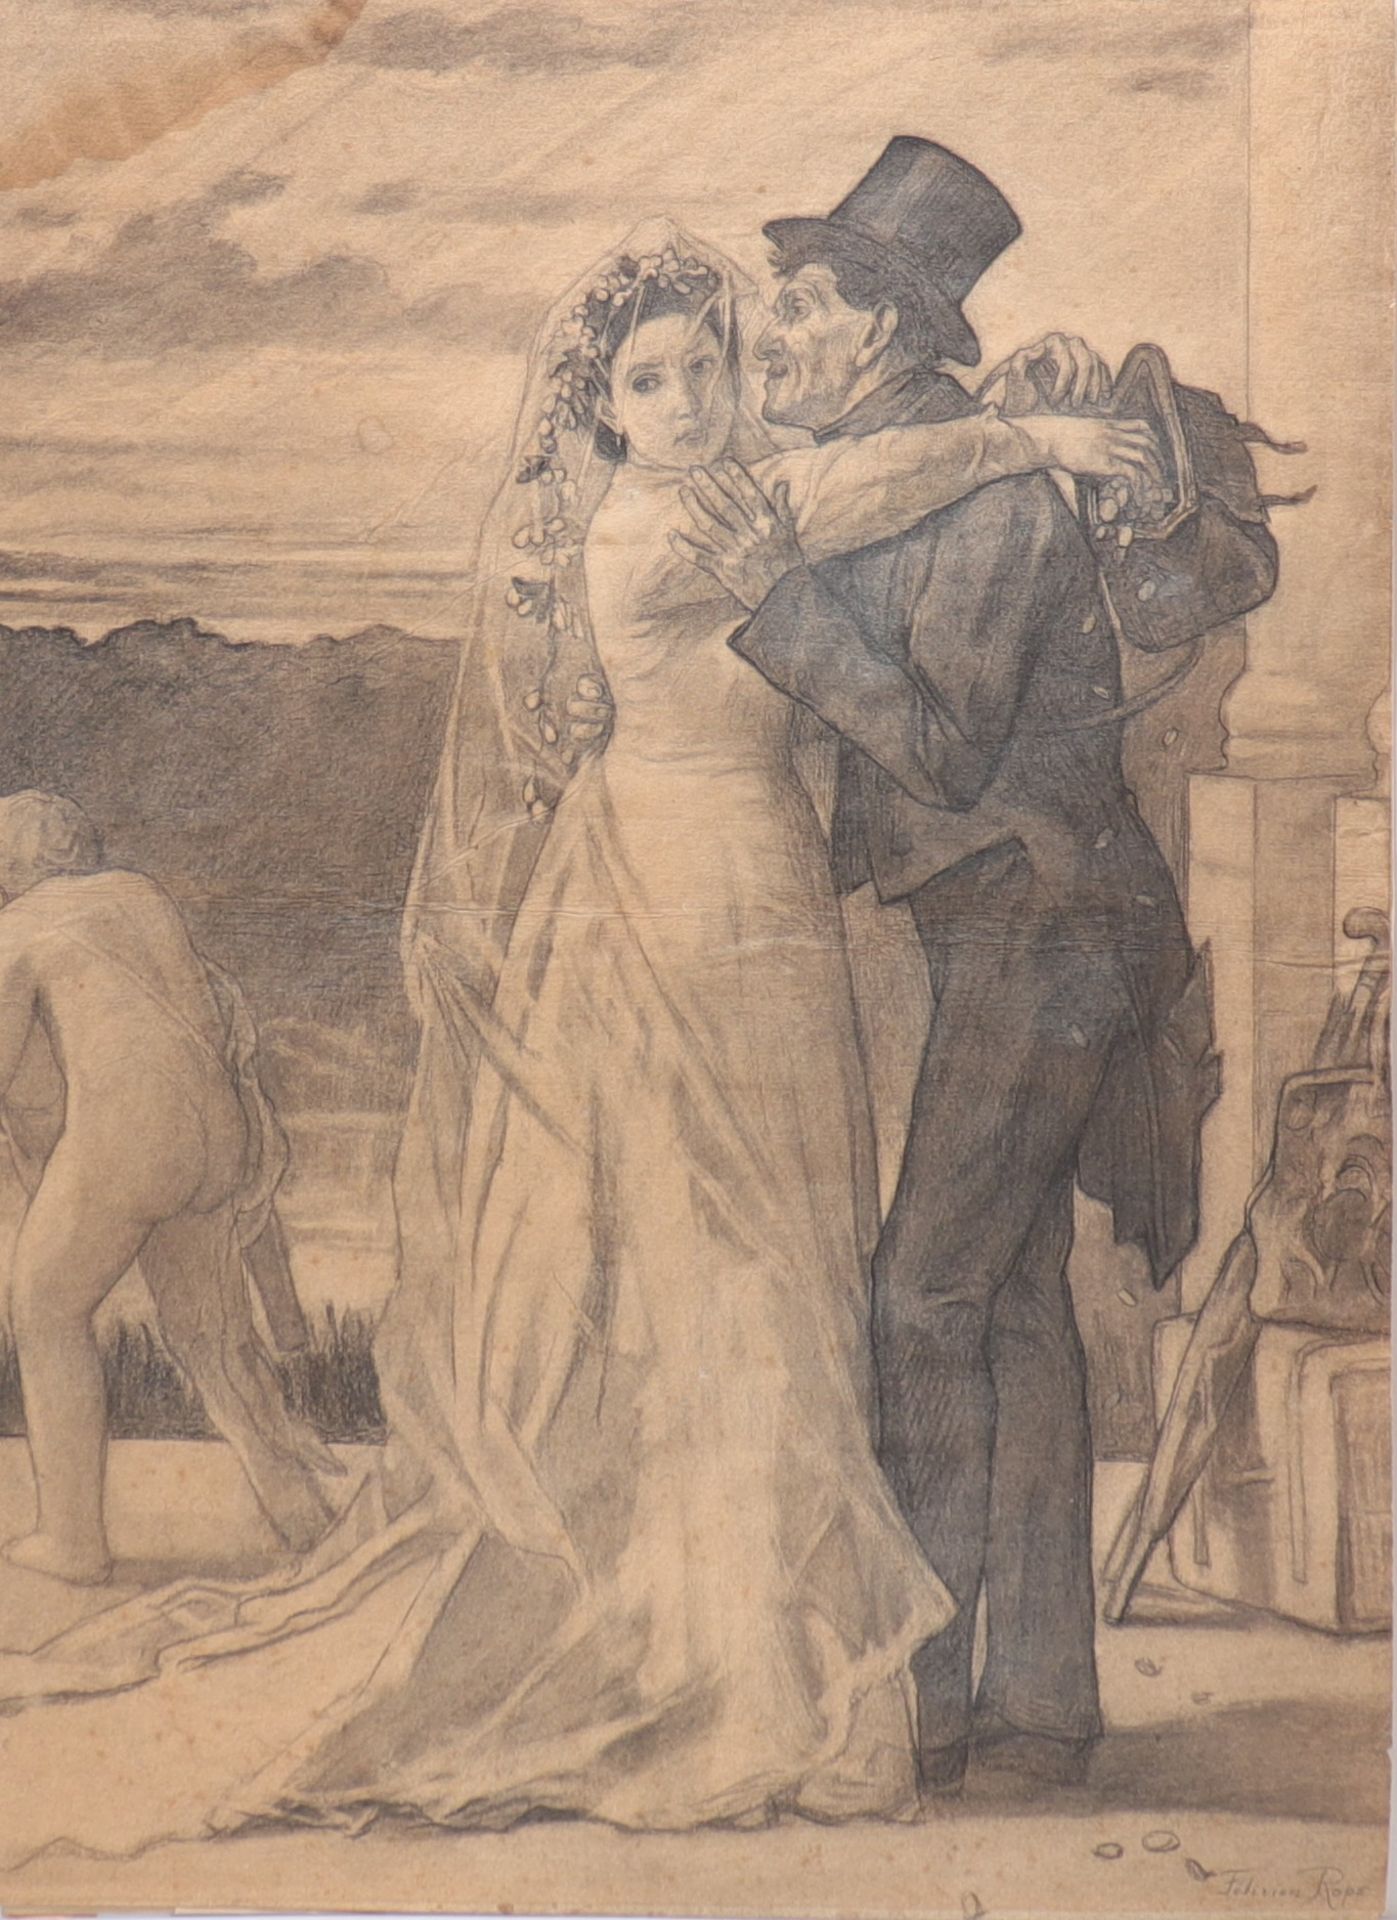 Felicien ROPS (1833-1898) attributed large drawing ' the marriage of interests'